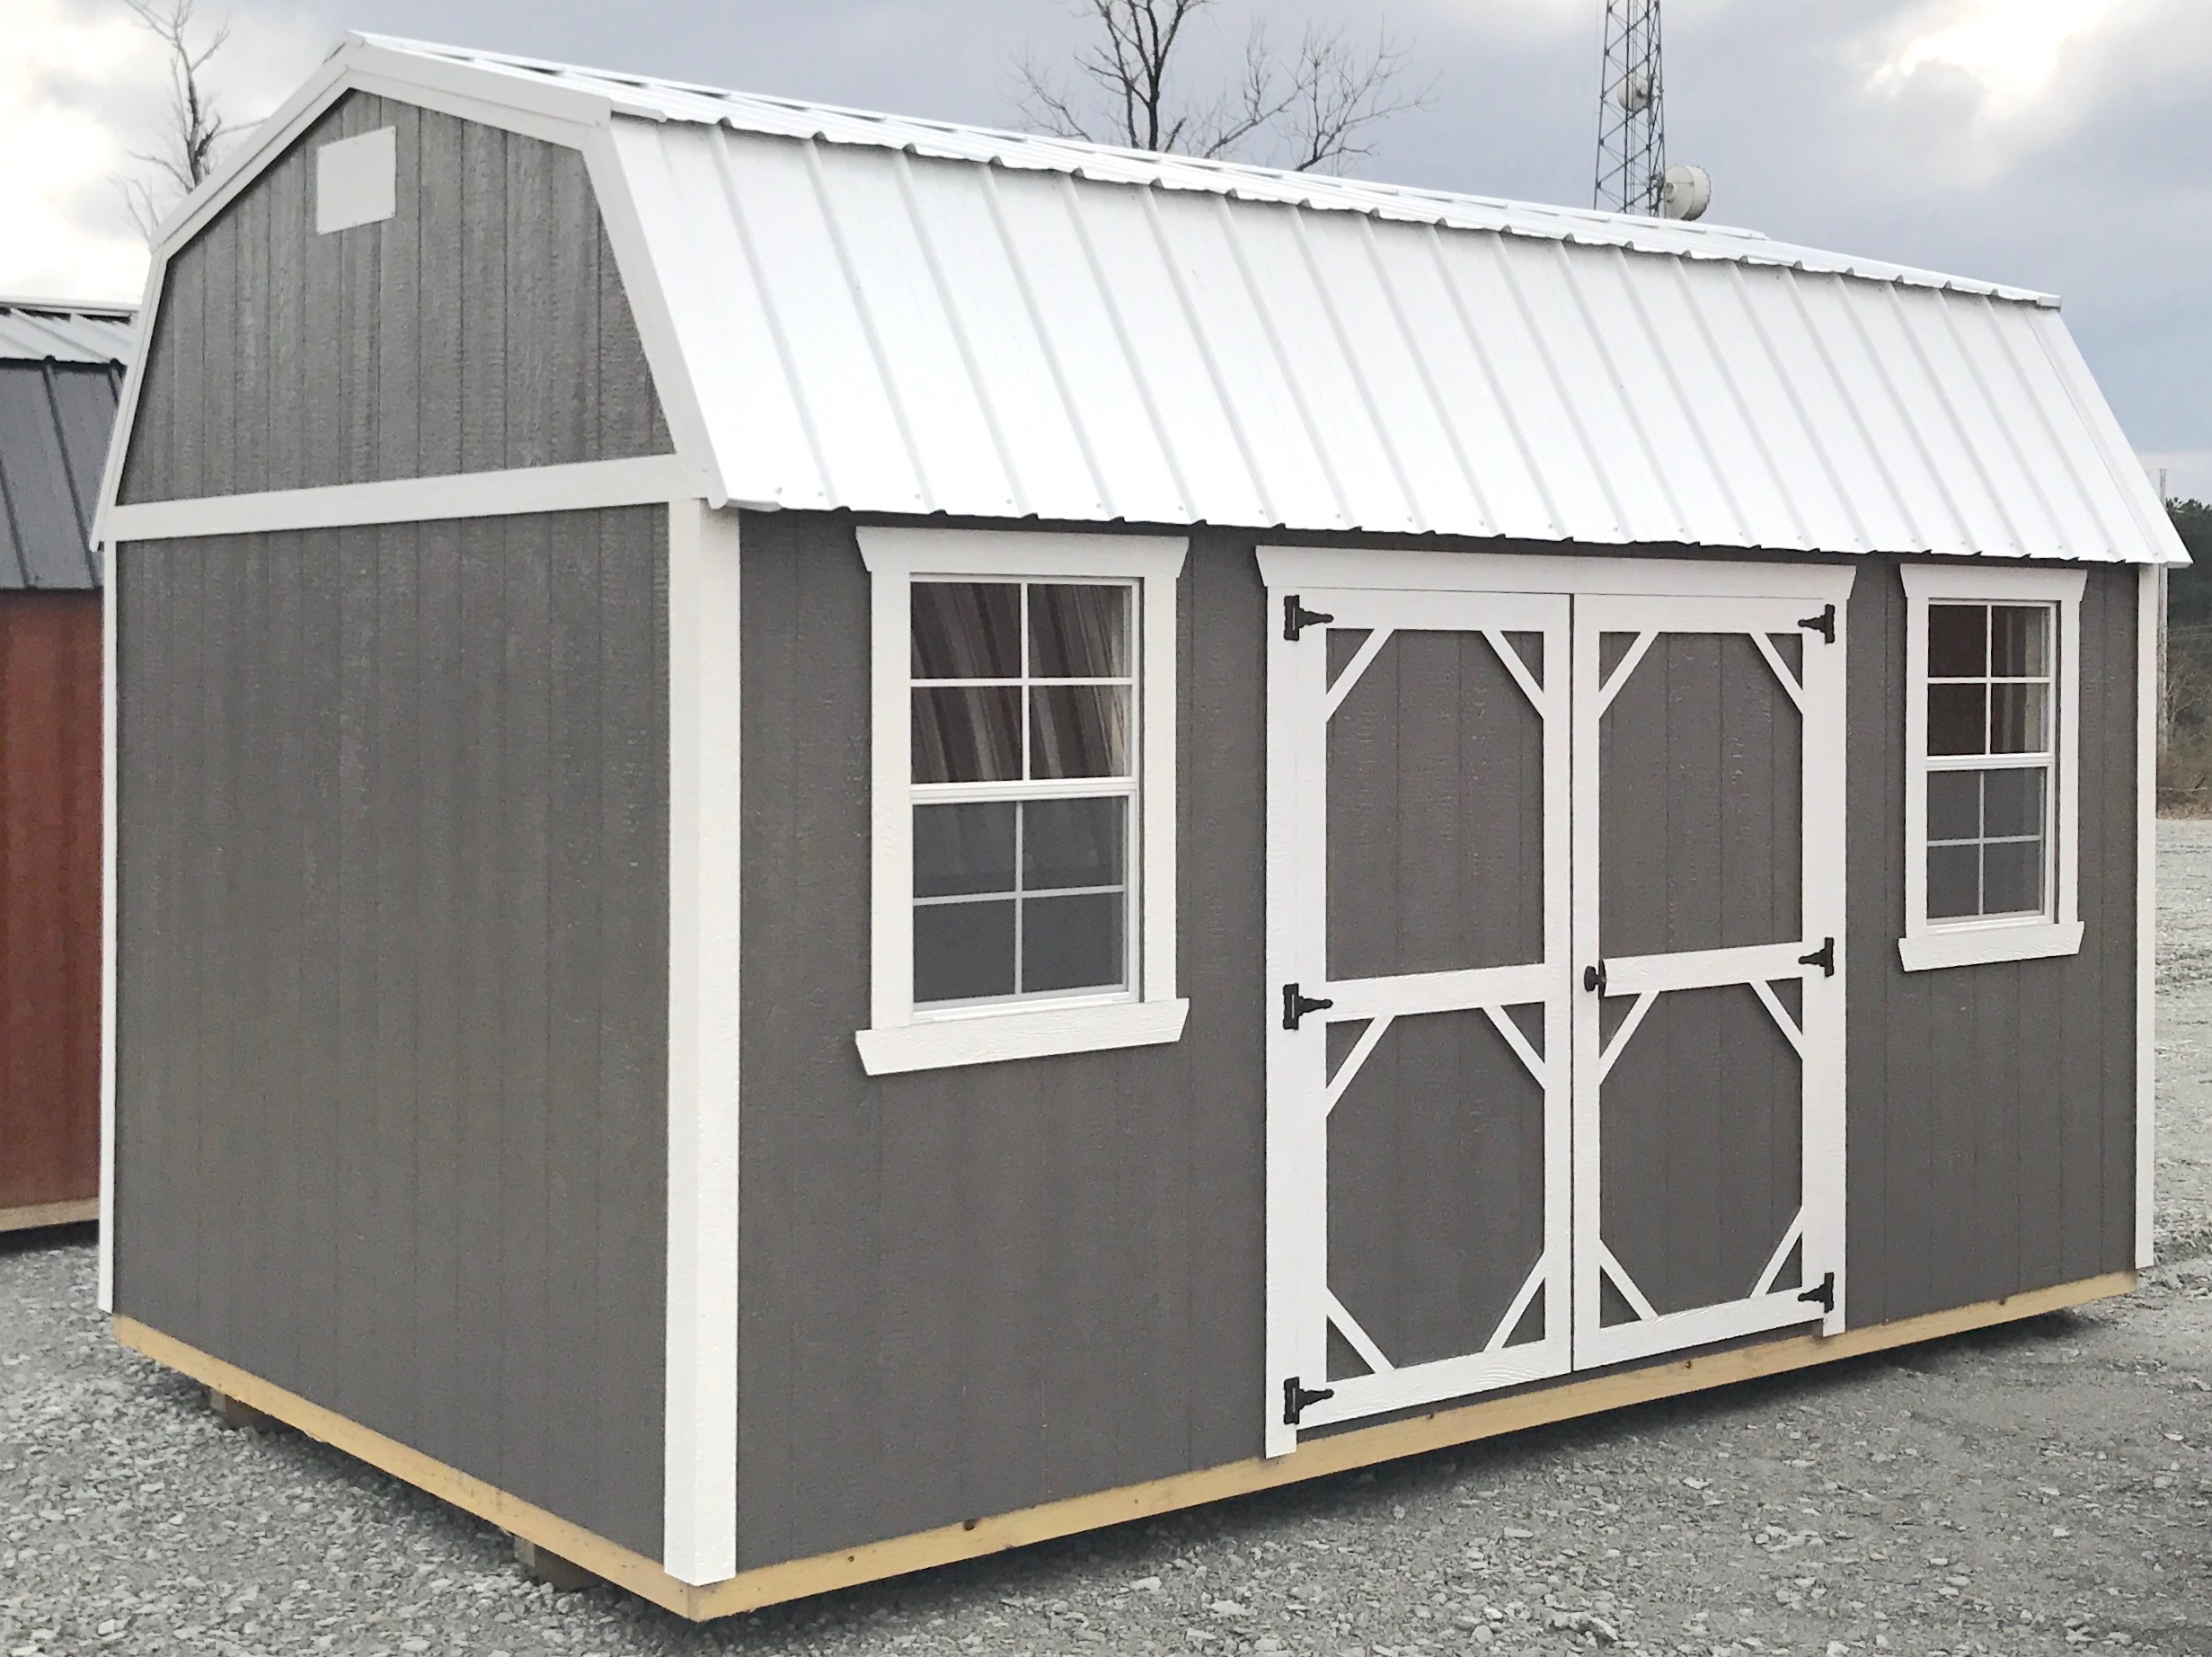 Gray urethane side lofted barn with white trim and metal roof